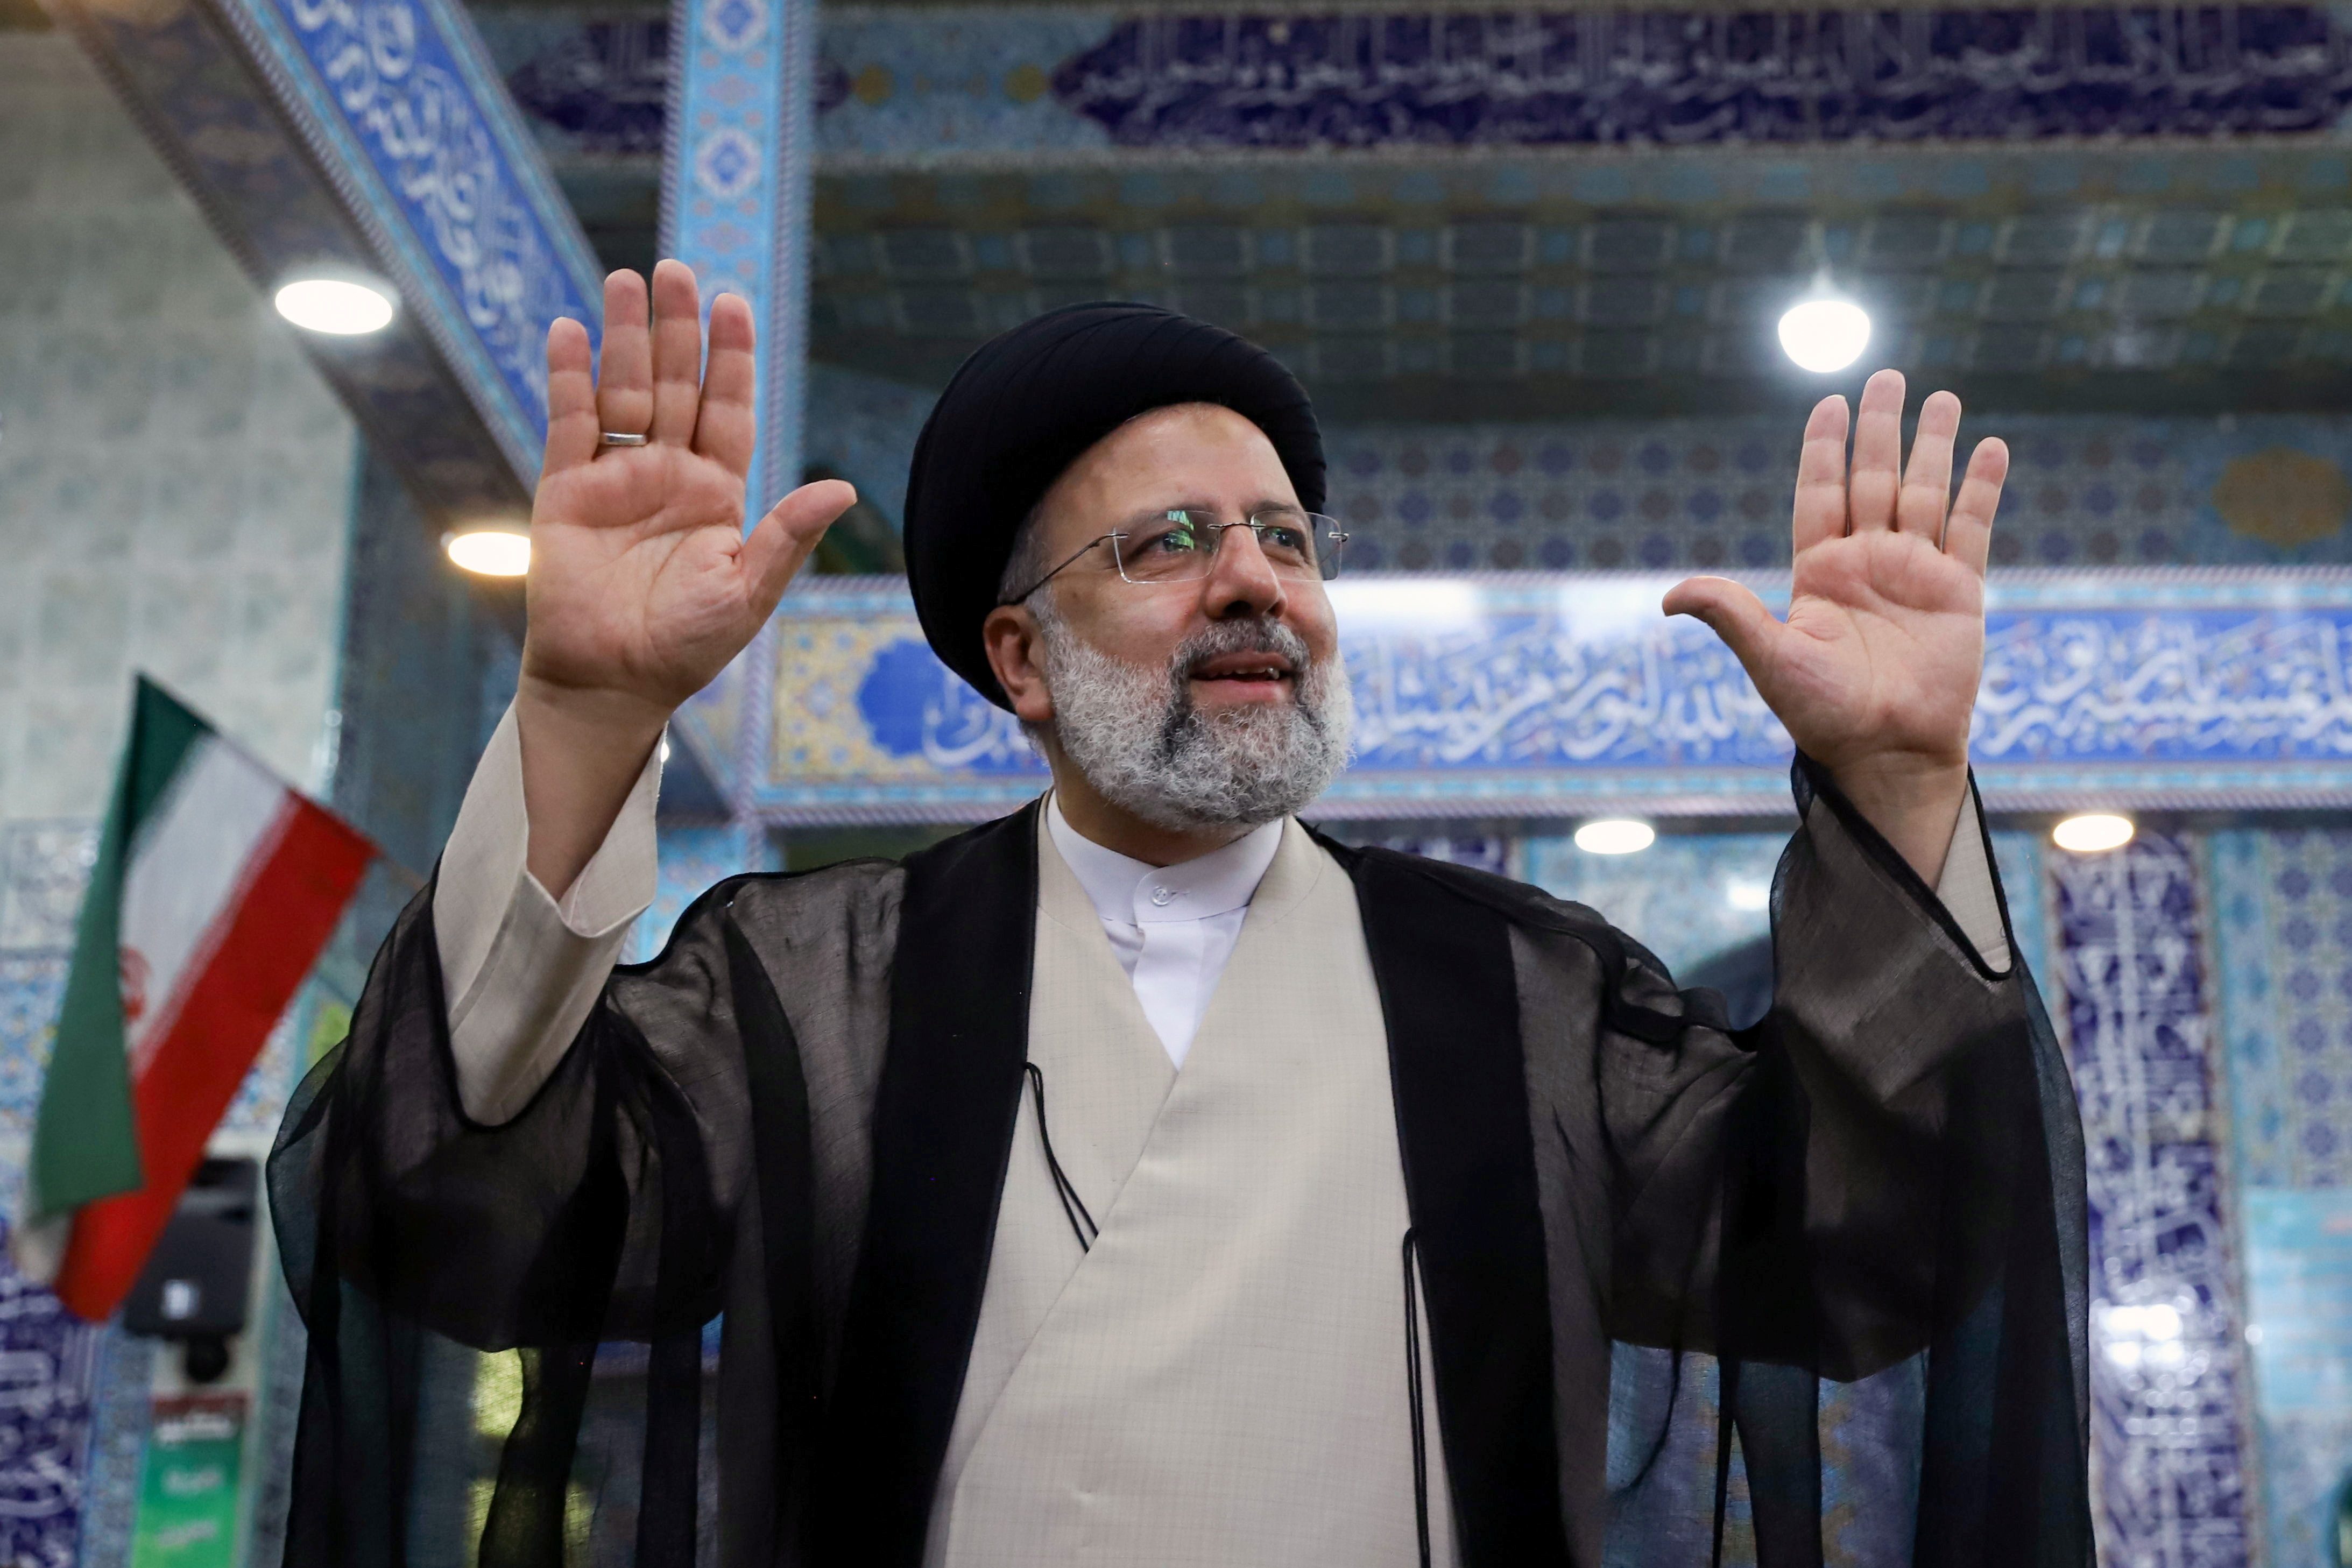 Iran’s foreign minister says Raisi is new elected president